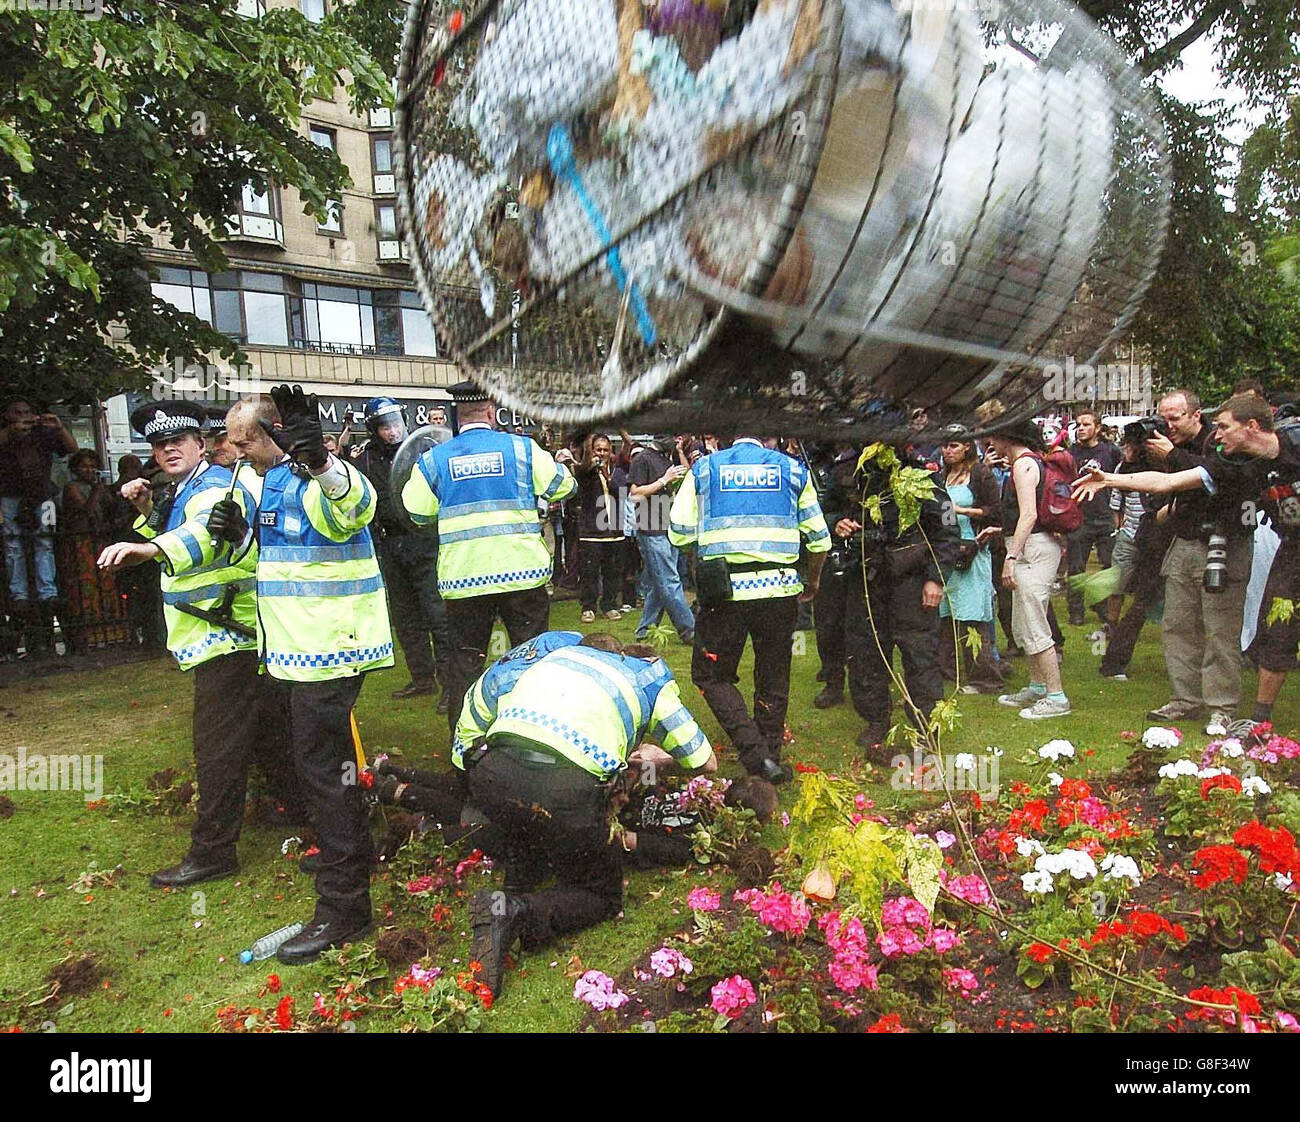 A litter bin hurled by a protester flies through the air towards police in Princes Street, as anti-capitalist demonstrators took to the streets of Scotland's capital ahead of Wednesday's meeting of the G8 leaders in Gleneagles. Stock Photo